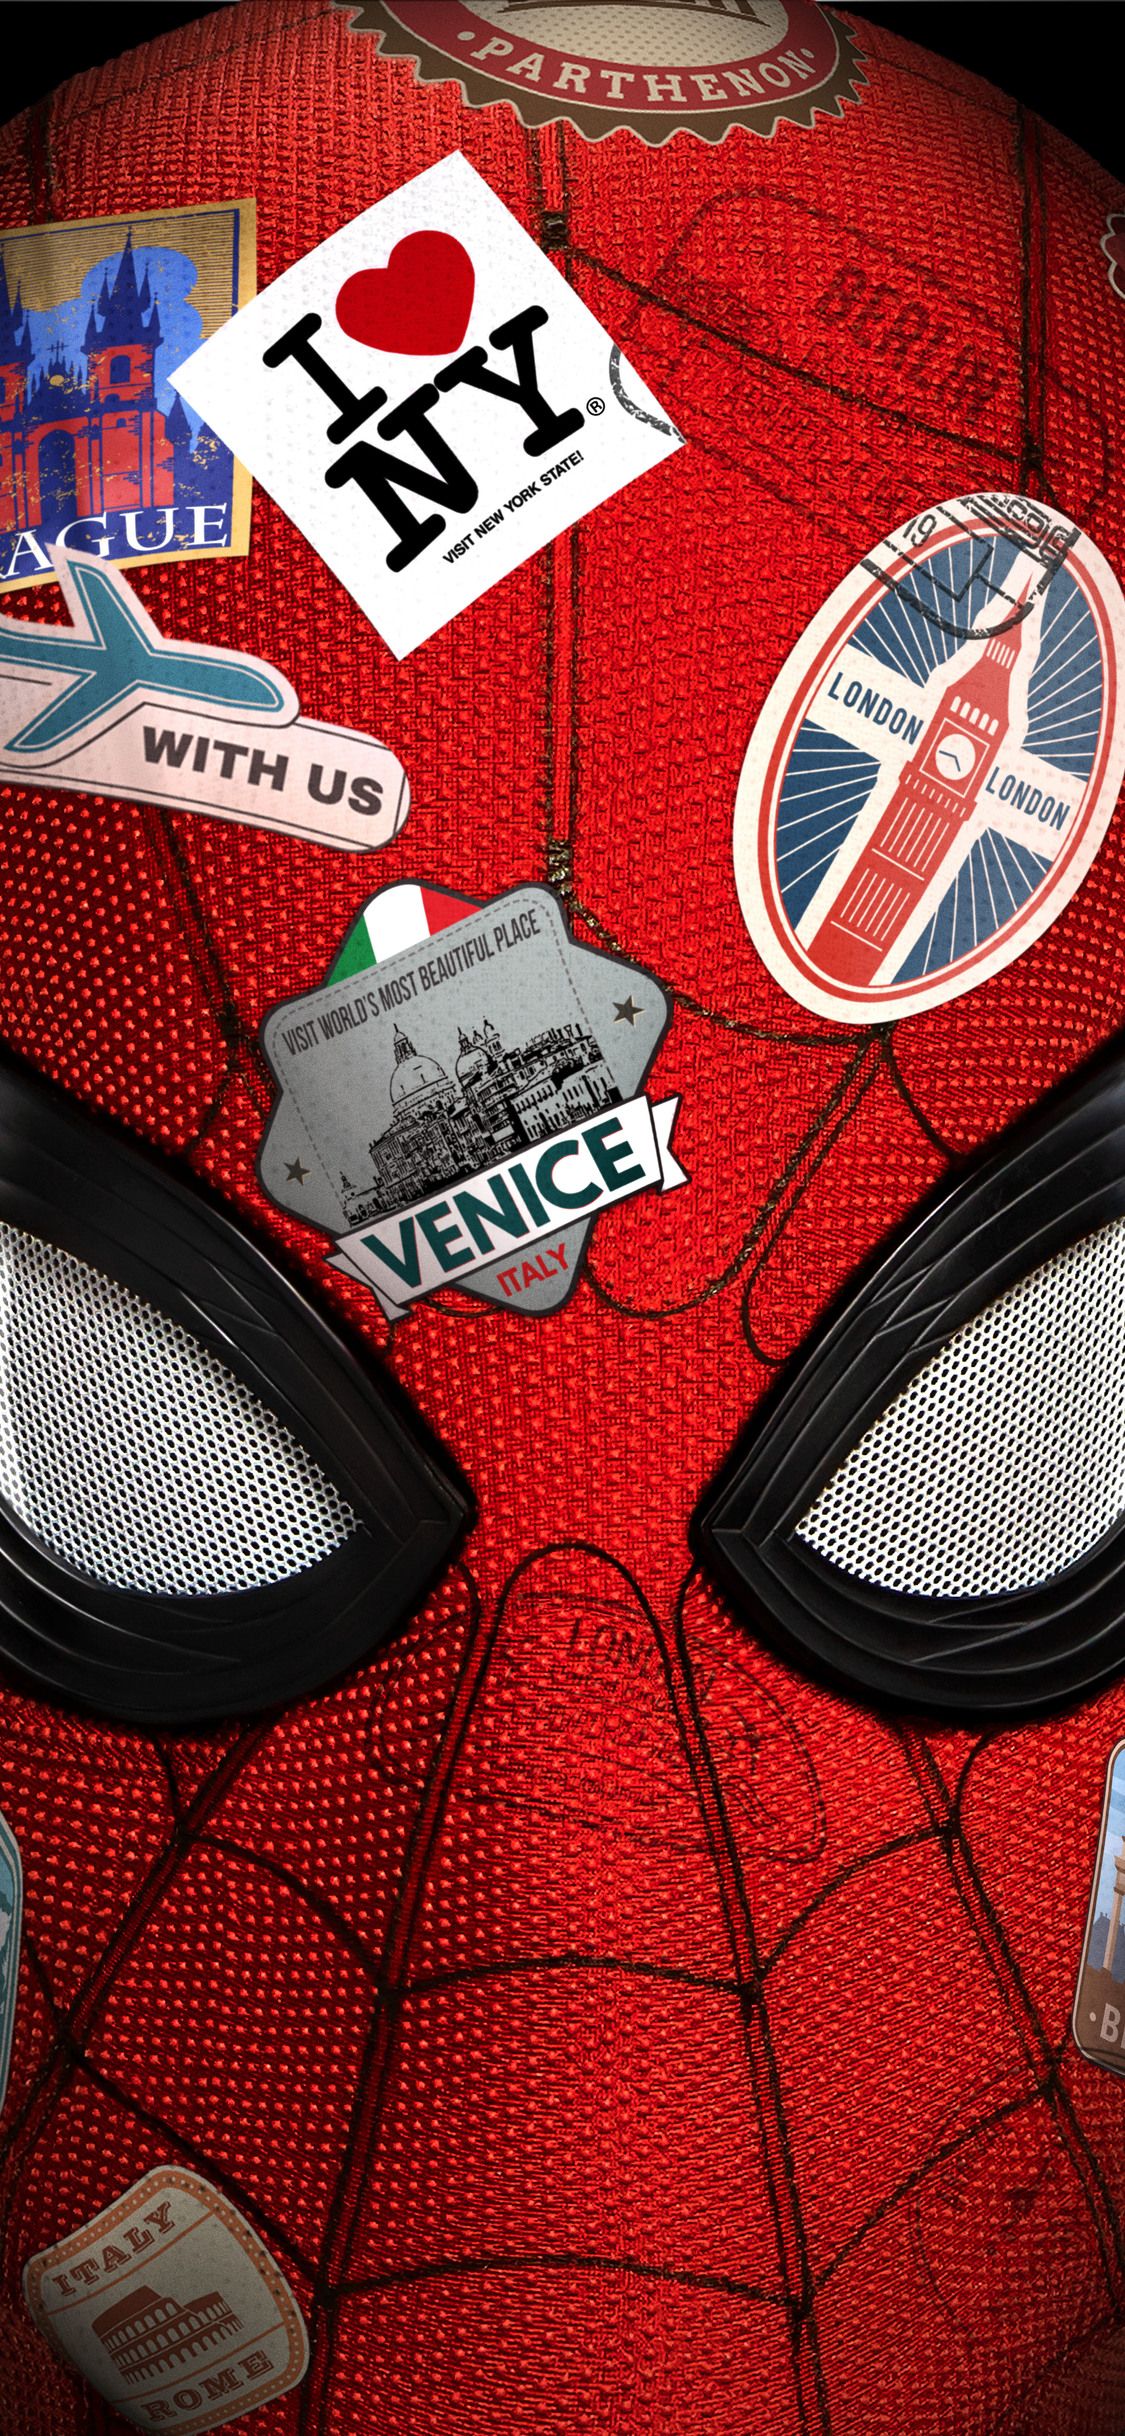 instal the new version for ipod Spider-Man: Far From Home